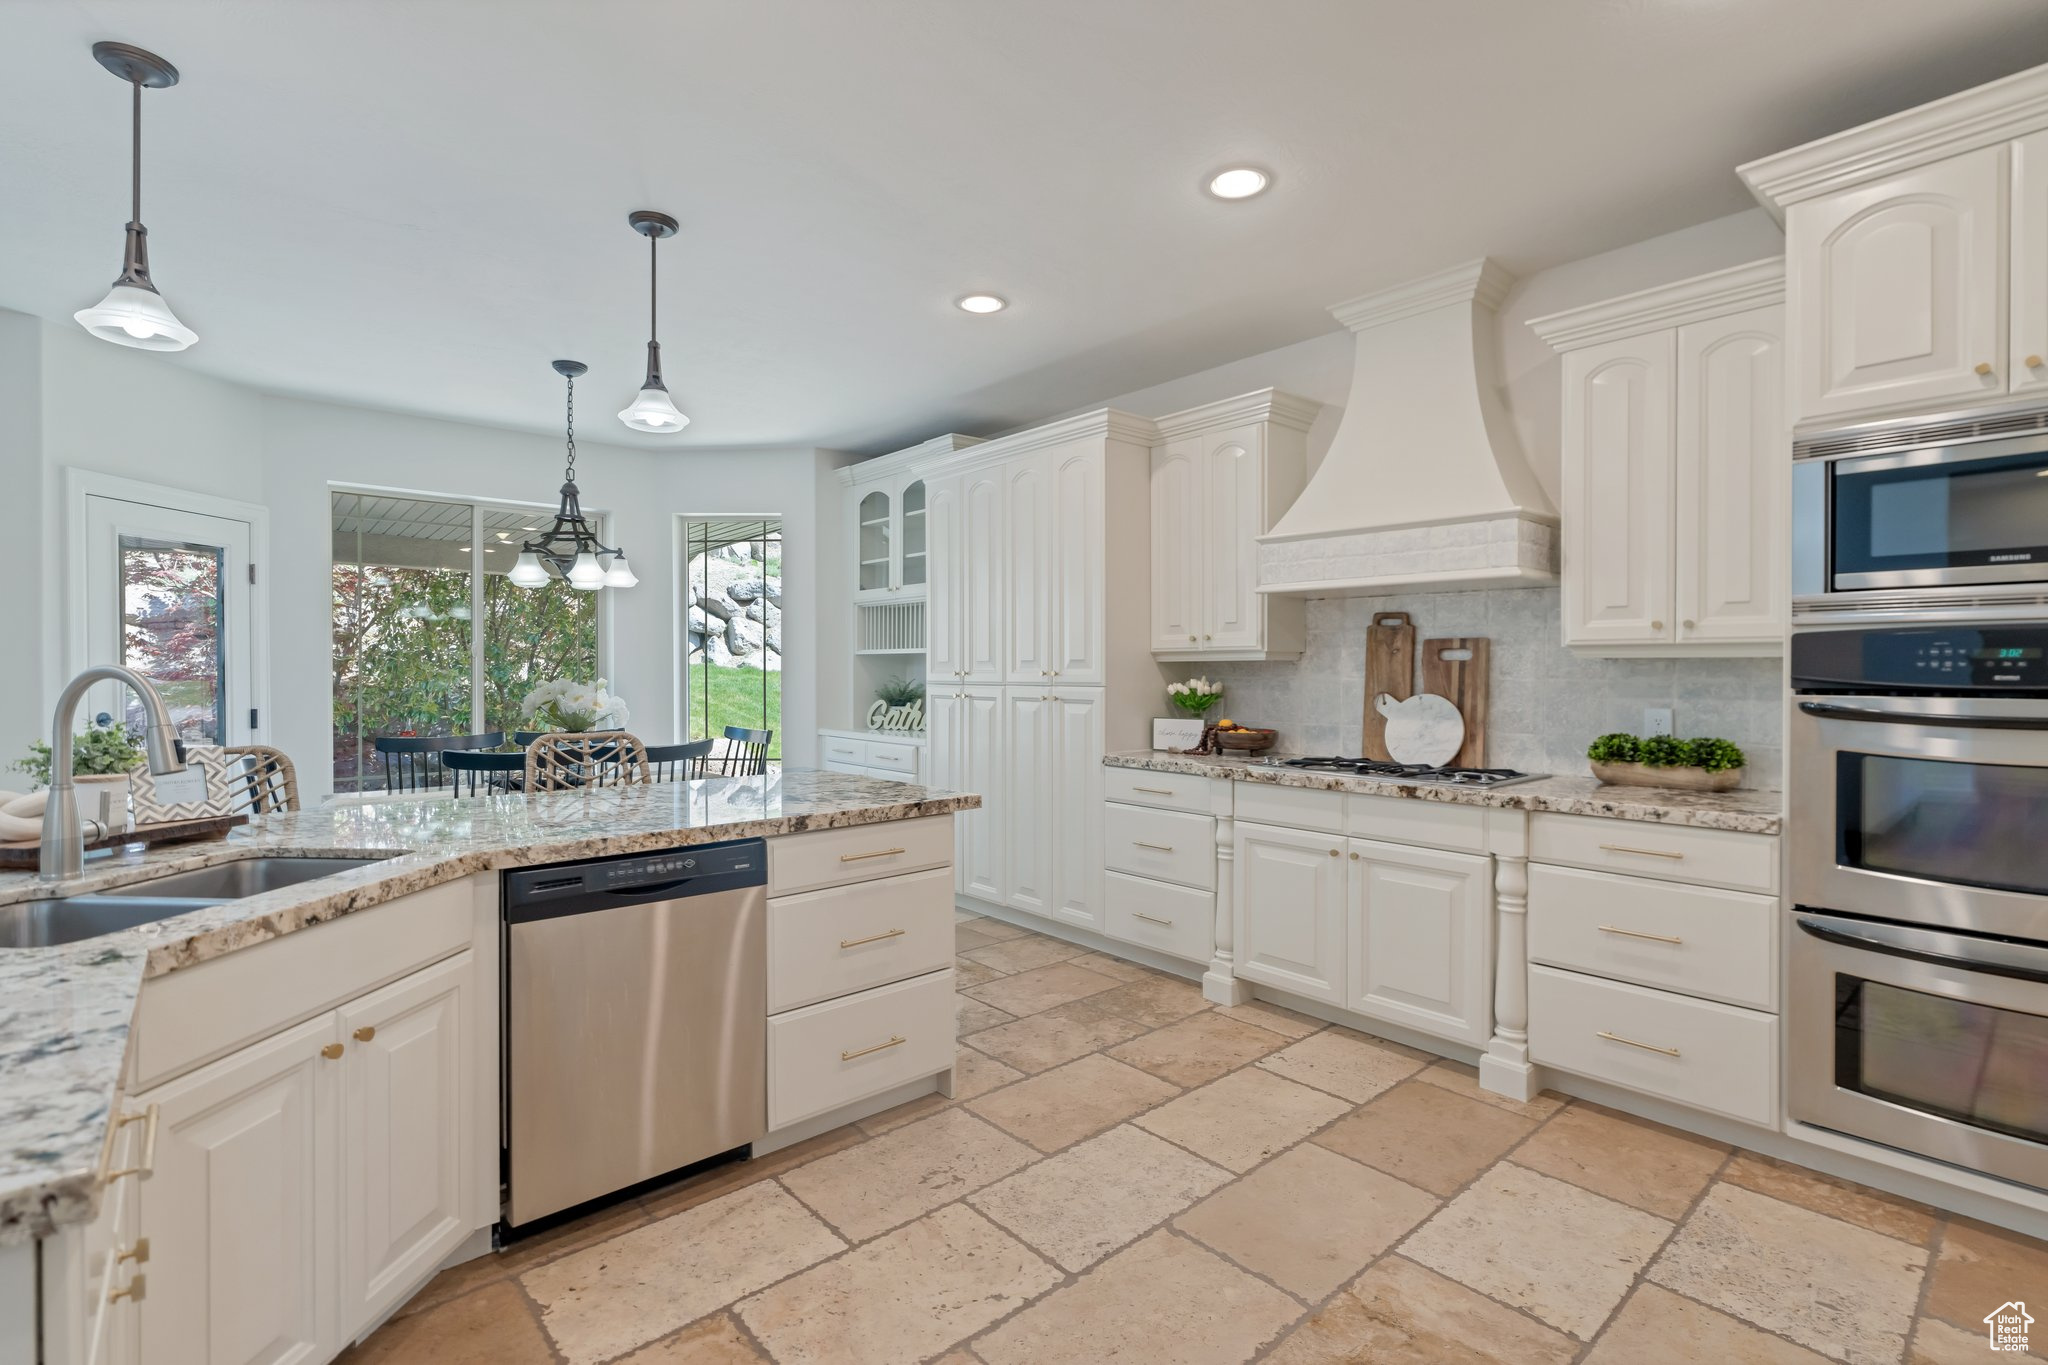 Kitchen features Granite Counters and Double Wall Ovens